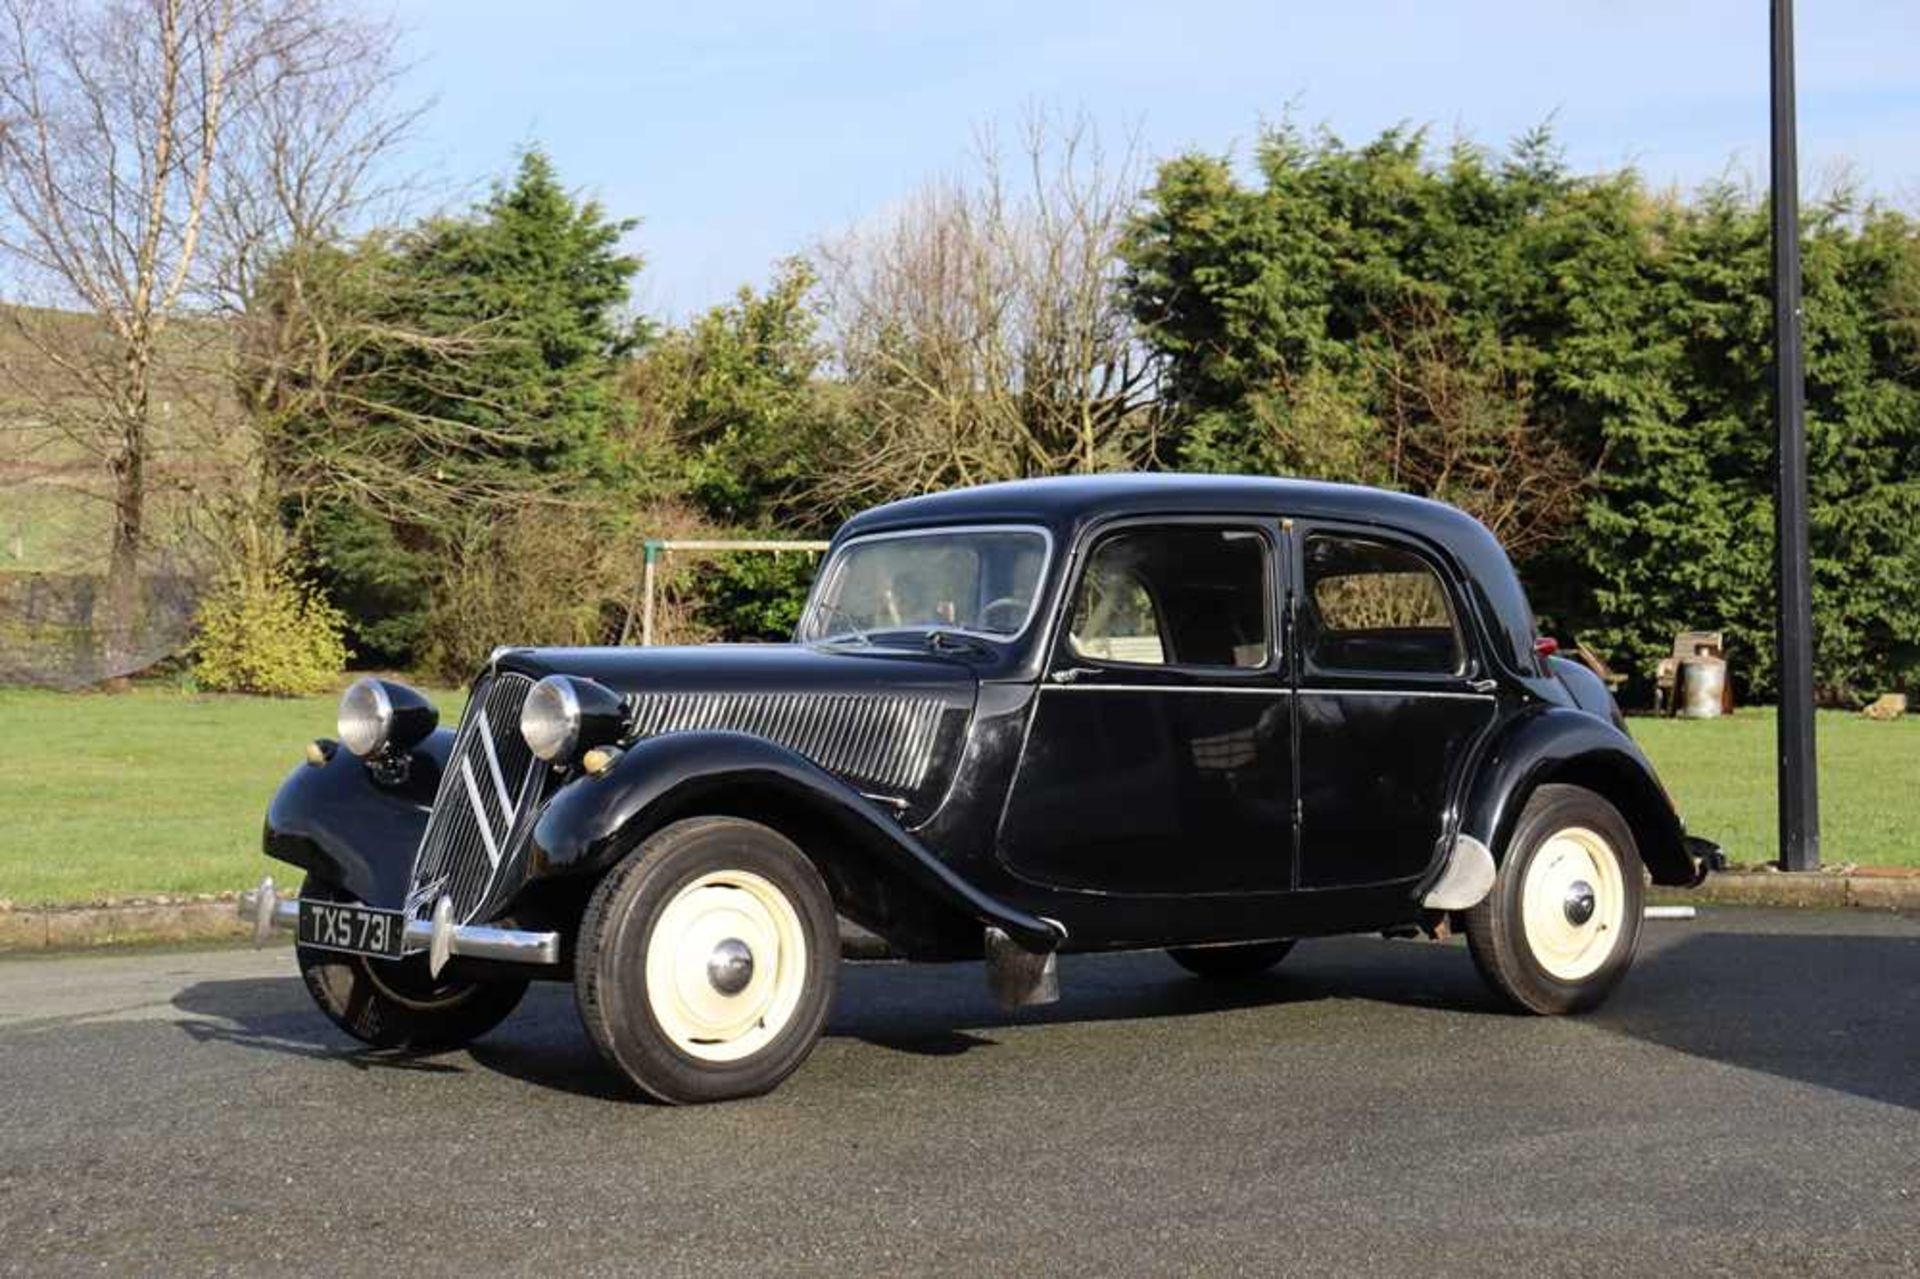 1952 Citroën 11BL Traction Avant In current ownership for over 40 years - Image 3 of 60